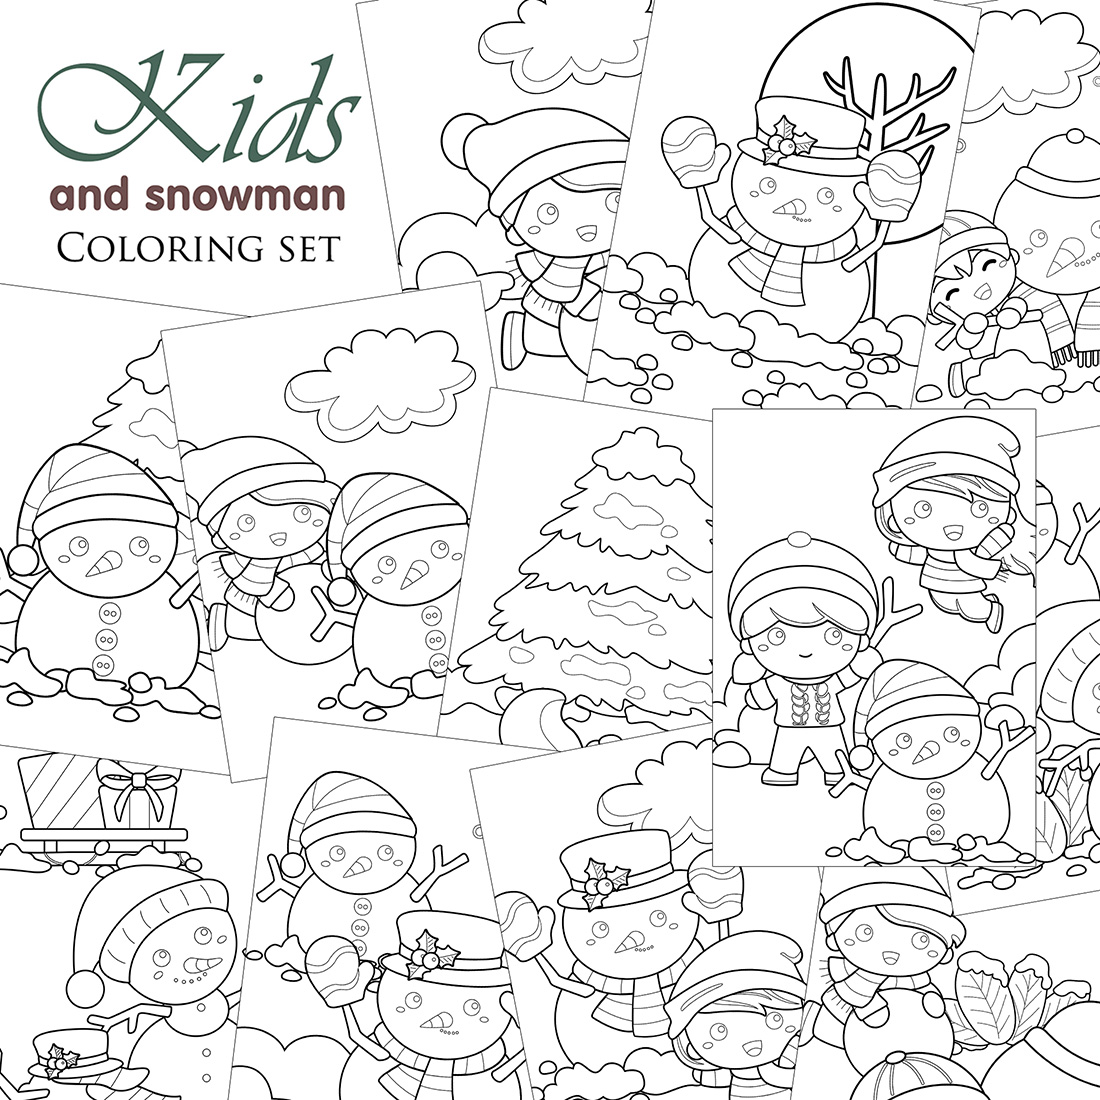 Cute Happy Little Boy and Girl Making Snowman on Christmas Holiday